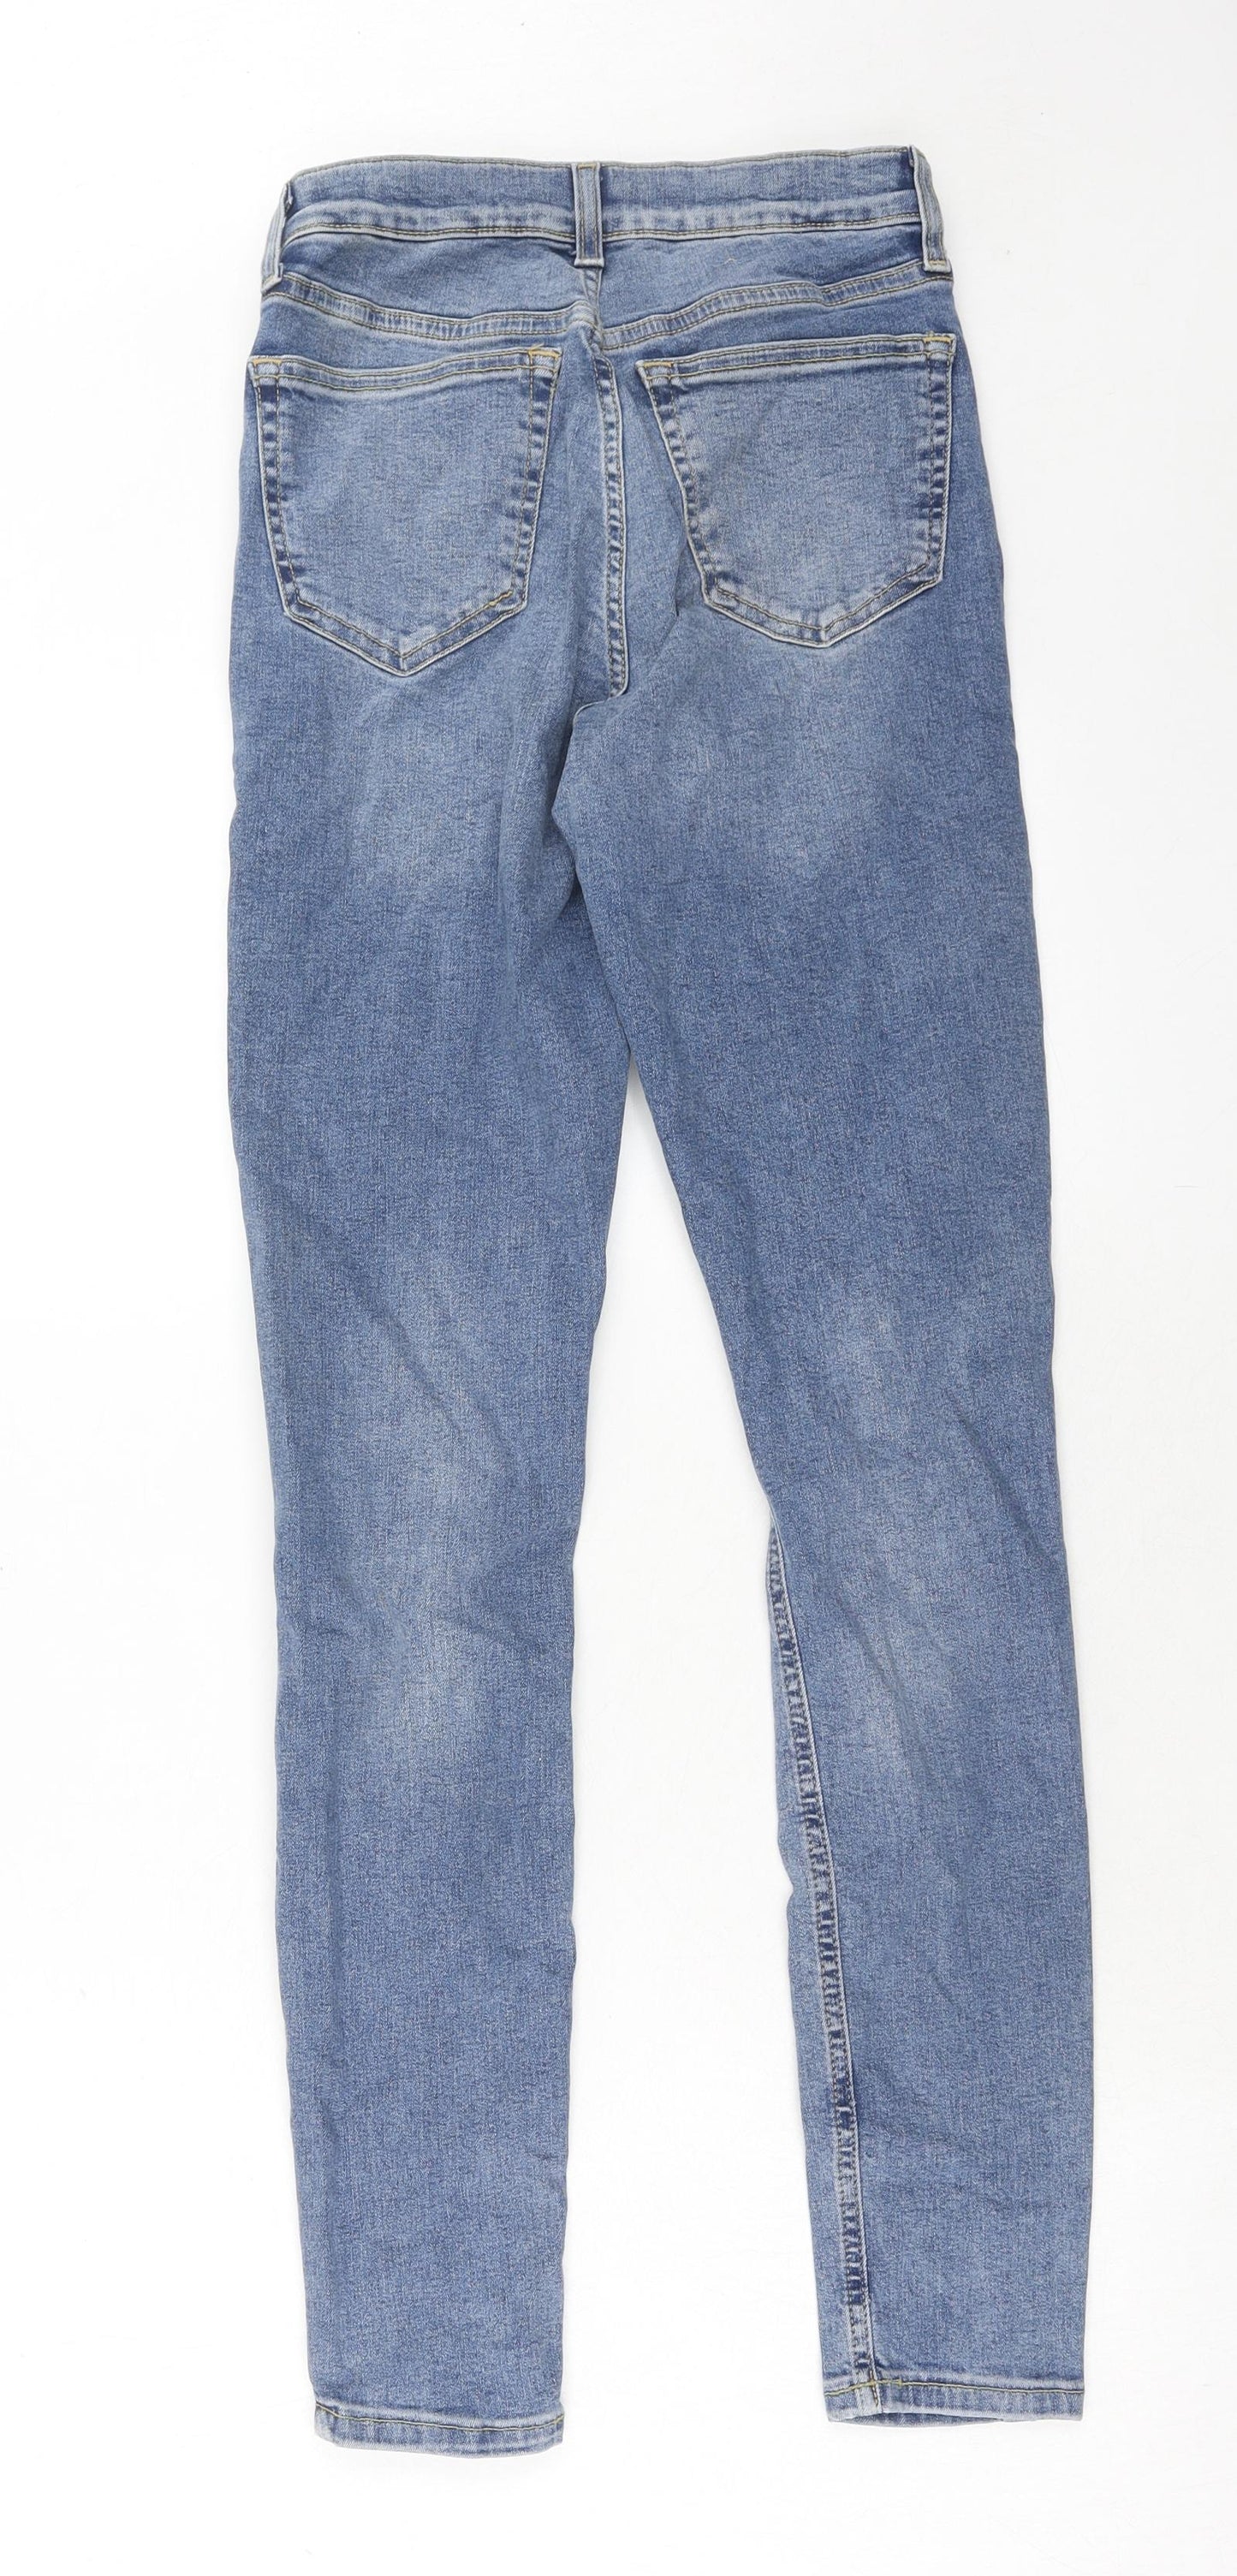 Topshop Womens Blue Cotton Skinny Jeans Size 26 in L34 in Regular Zip